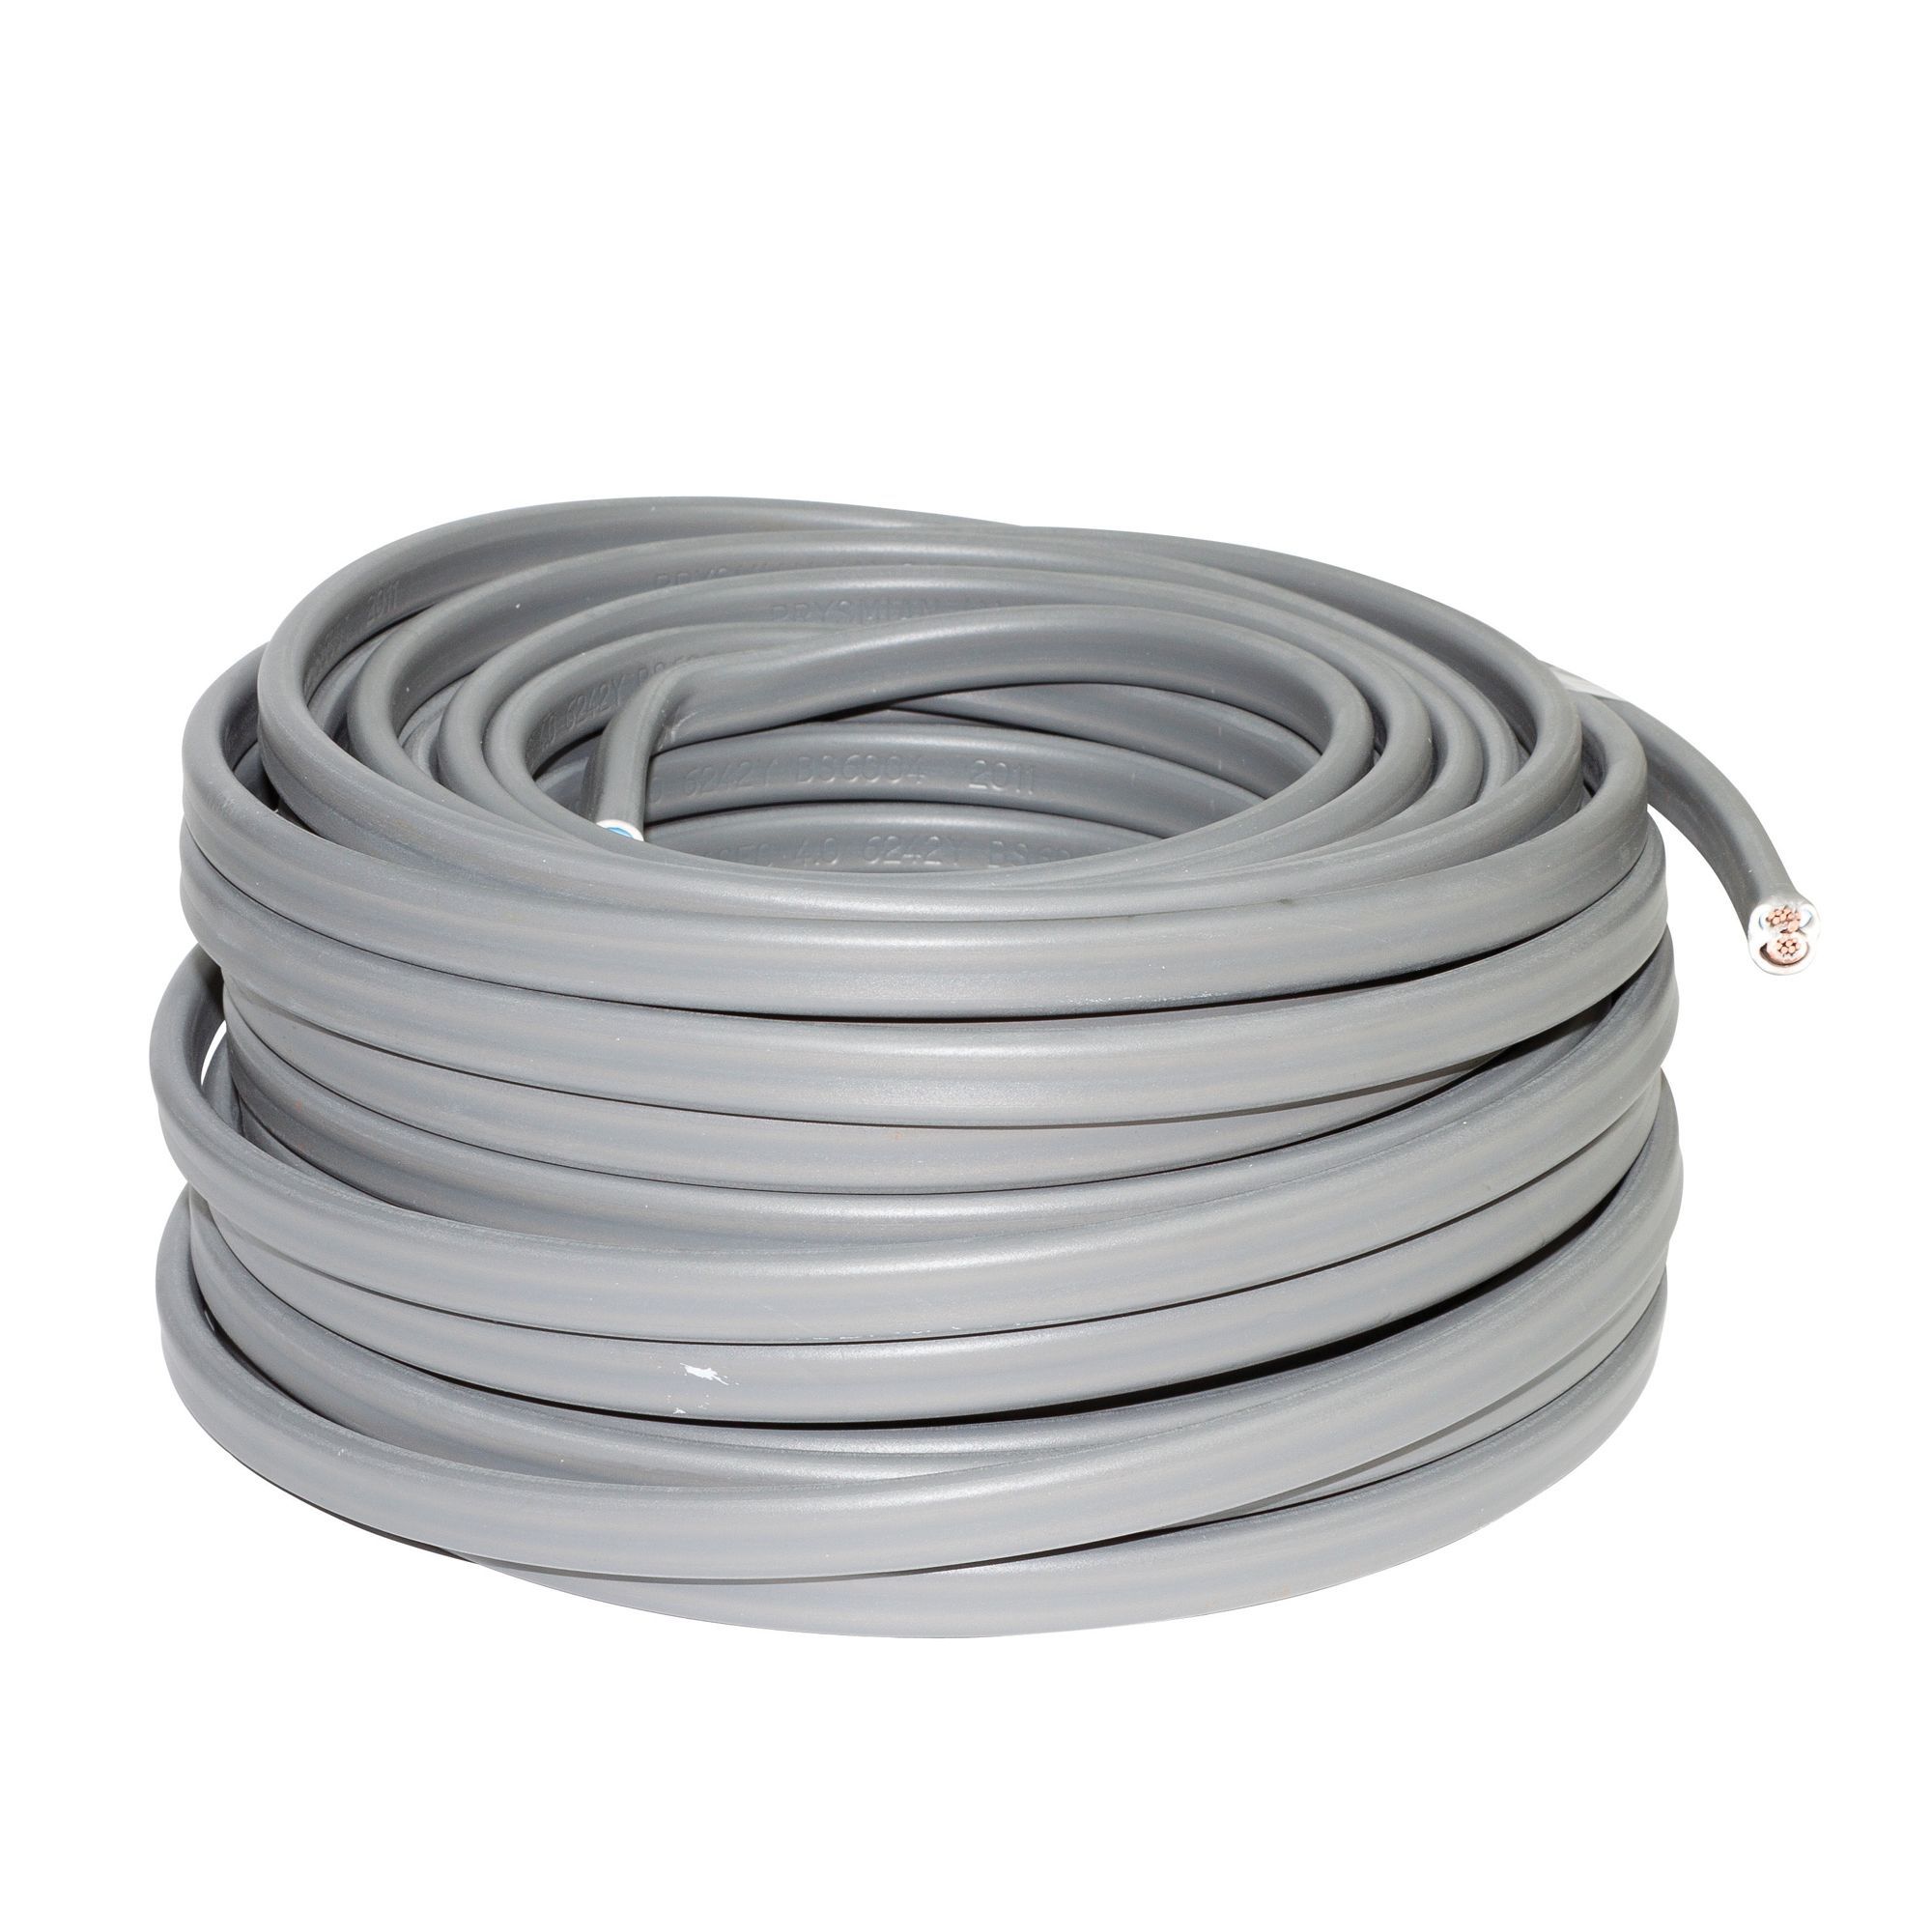 Prysmian Grey Twin & earth Cable 4mm² x 25m